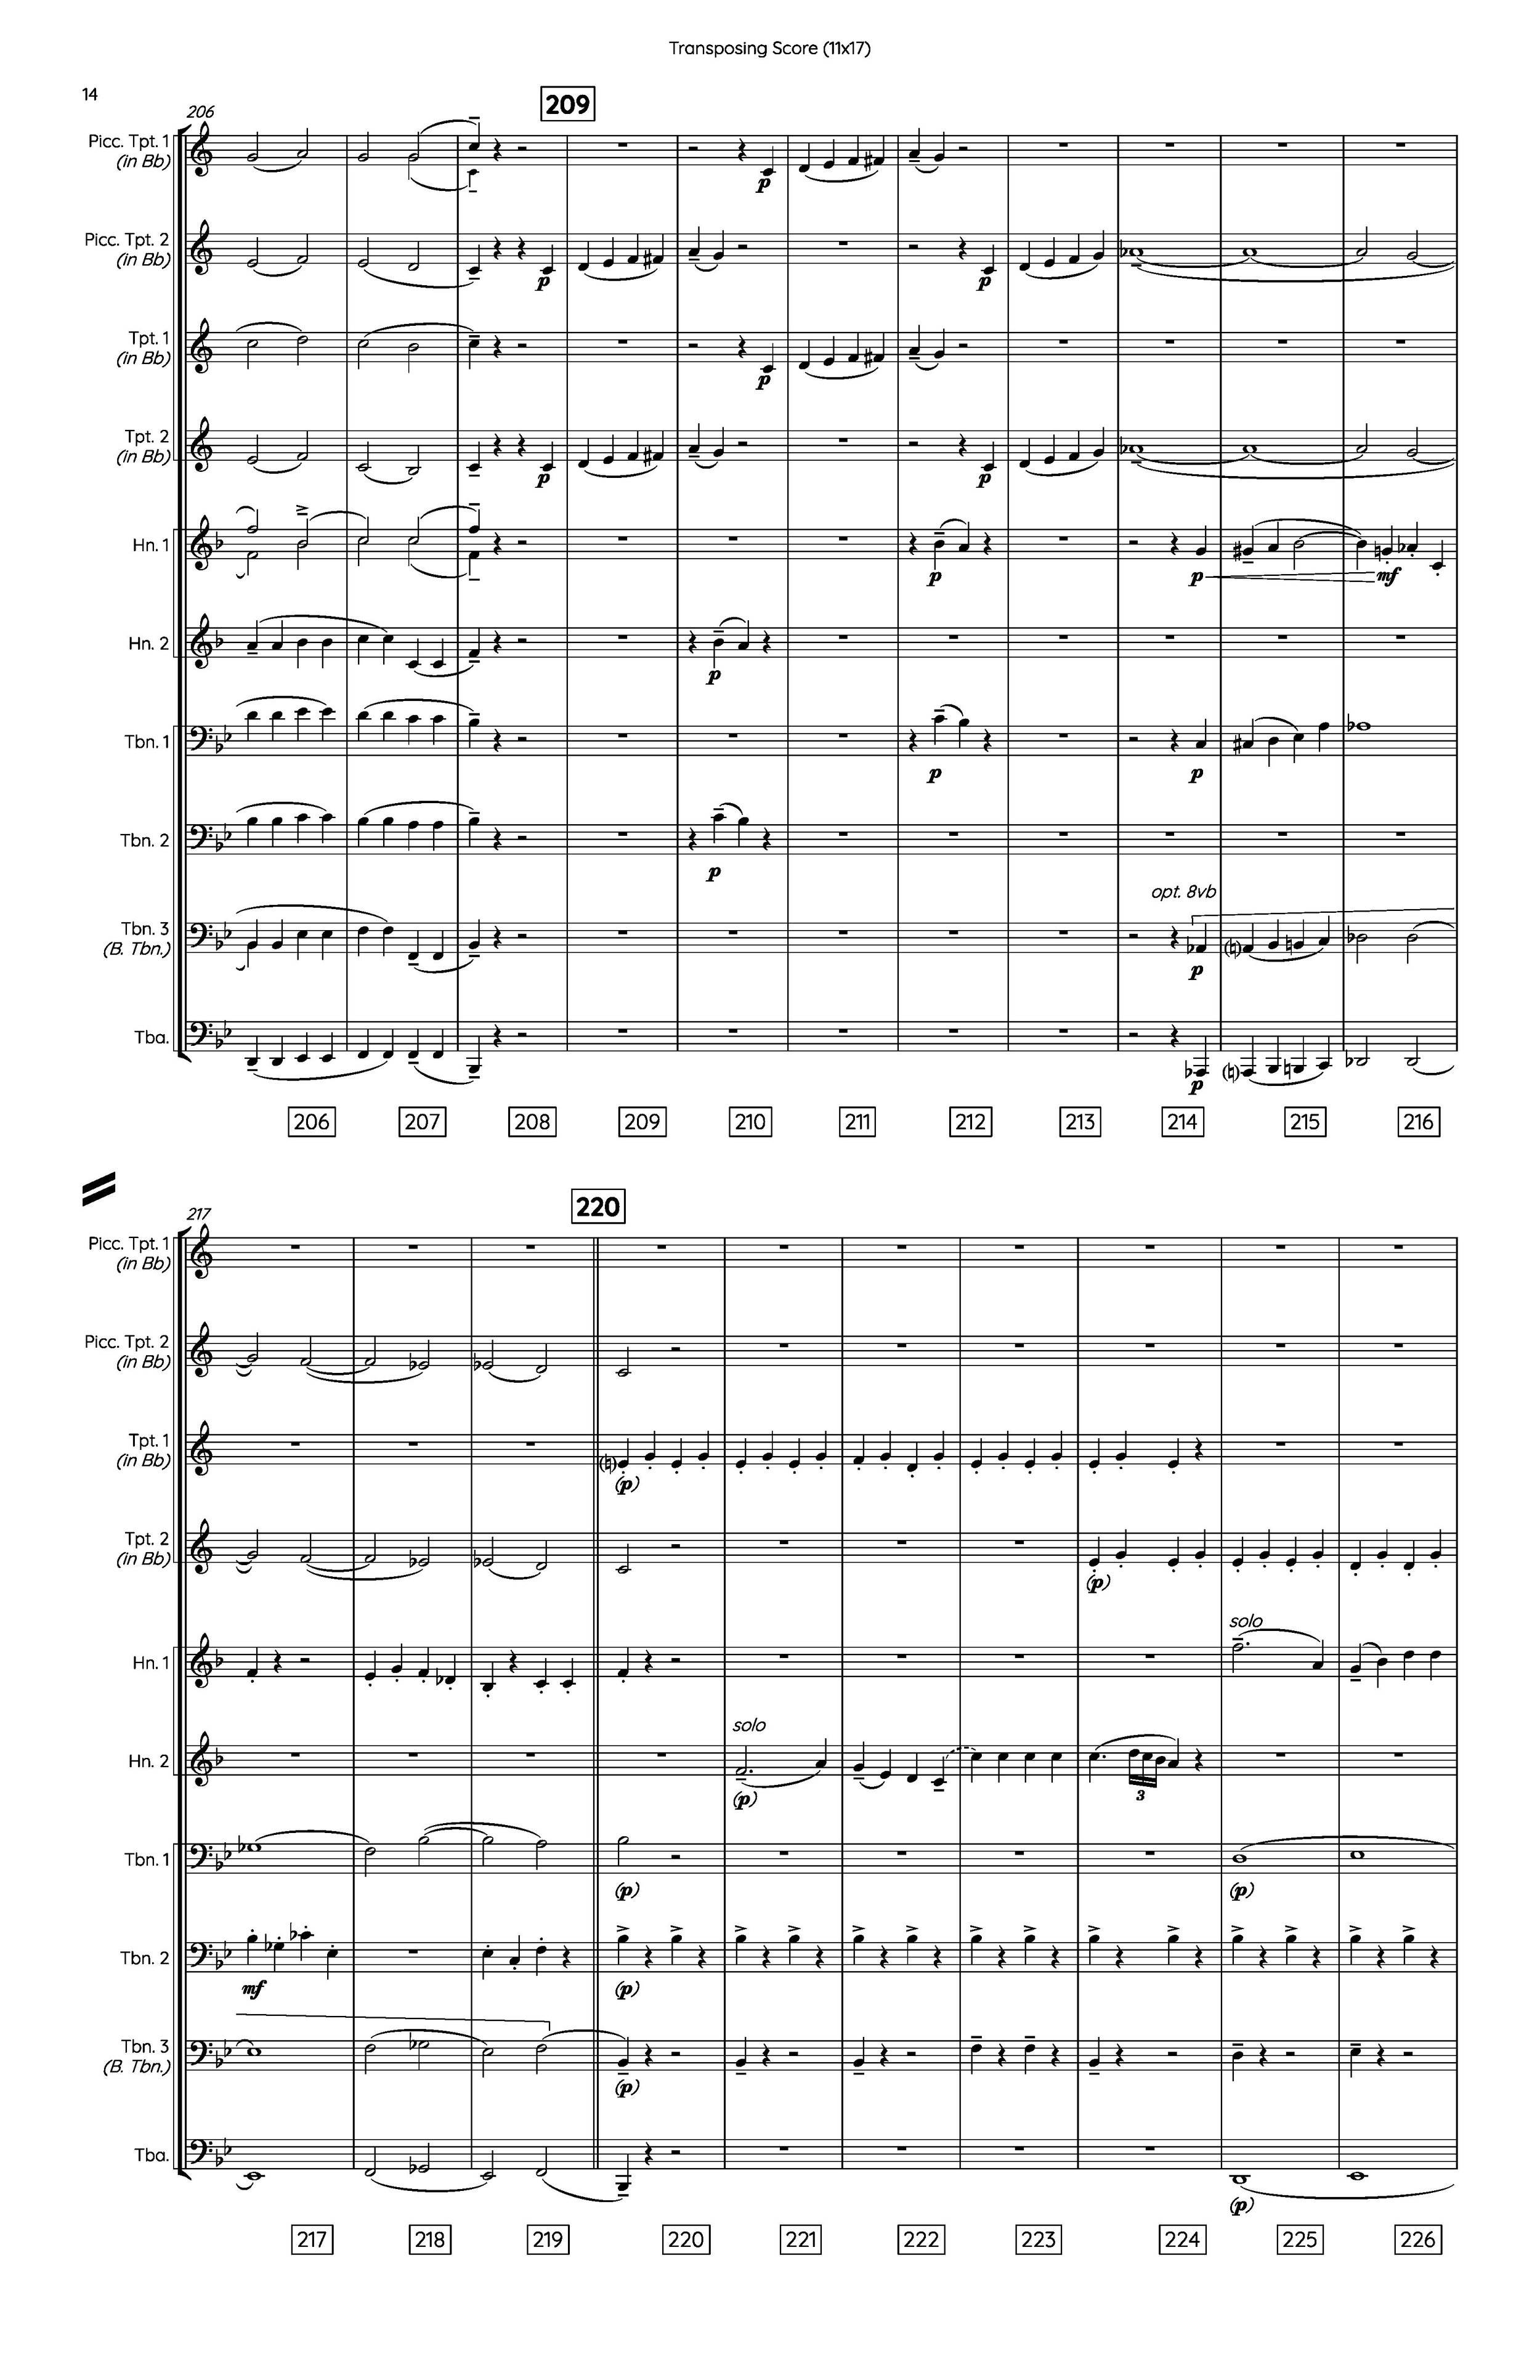 Marriage of Figaro [Brass Ensemble] in Bb - Score 11x17_Page_14.jpg